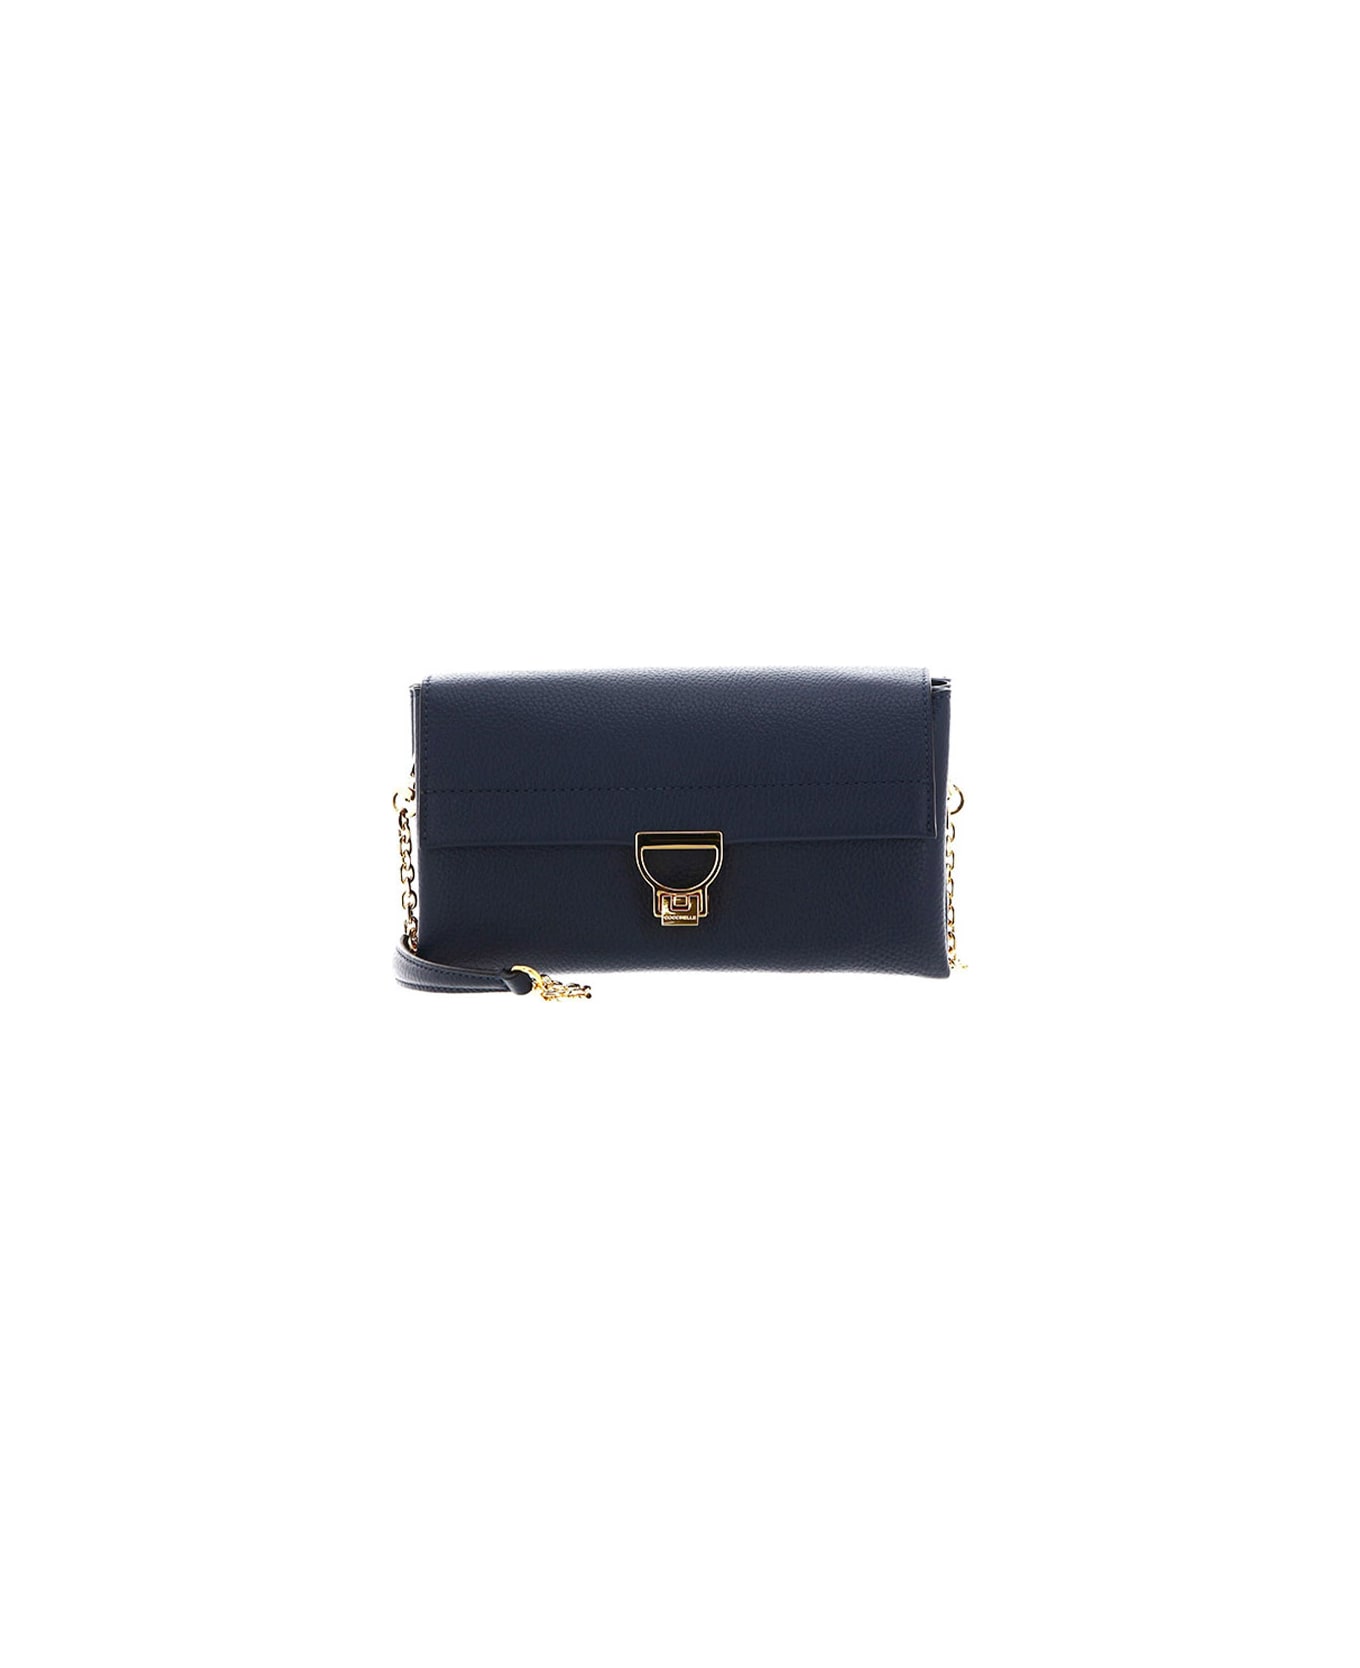 Coccinelle Arlettis Small Bag - Midnight blue